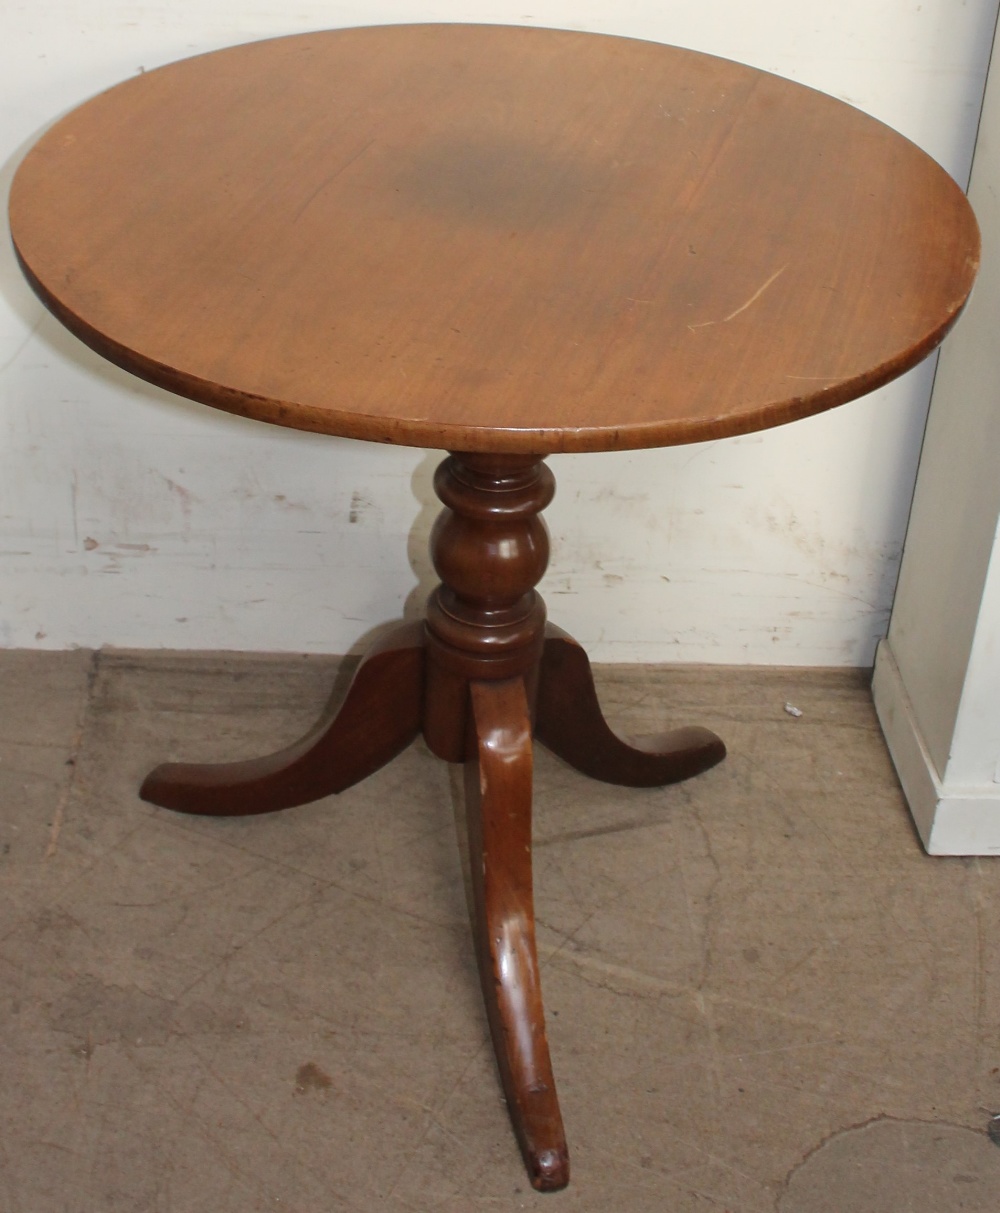 A Victorian mahogany tripod table with a turned column and spreading legs - Bild 2 aus 2